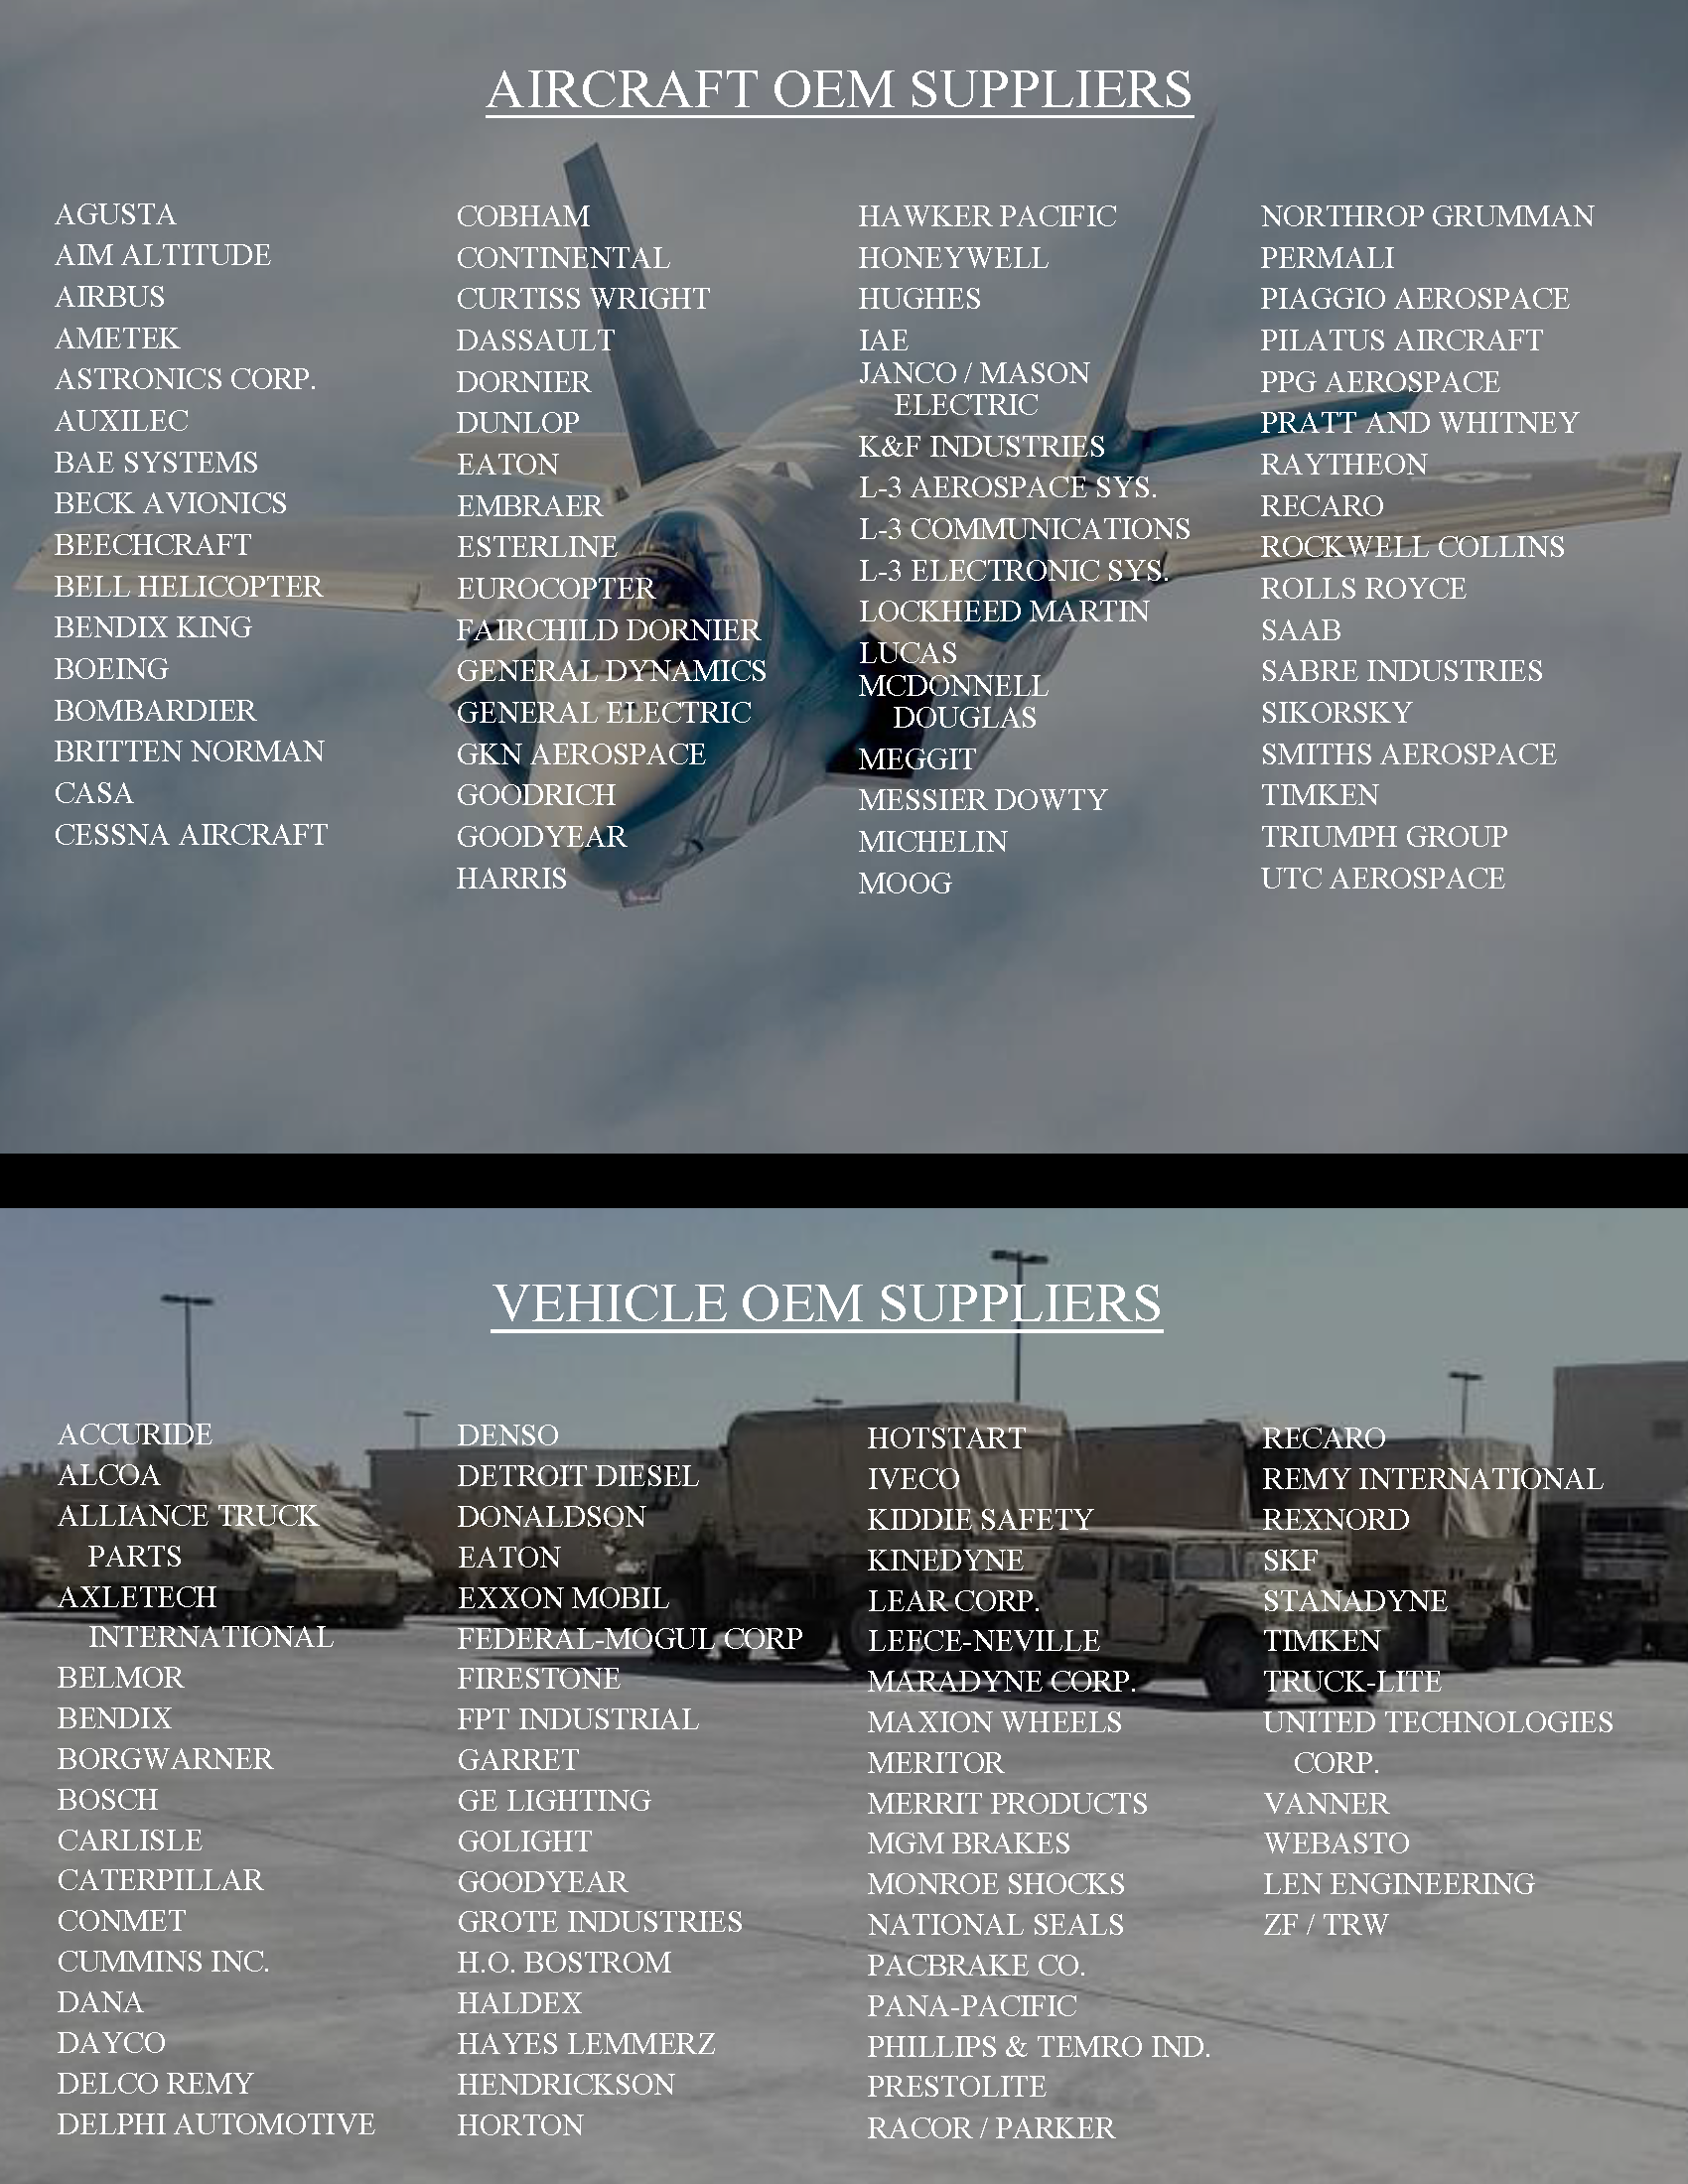 aircraft and vehicle oems